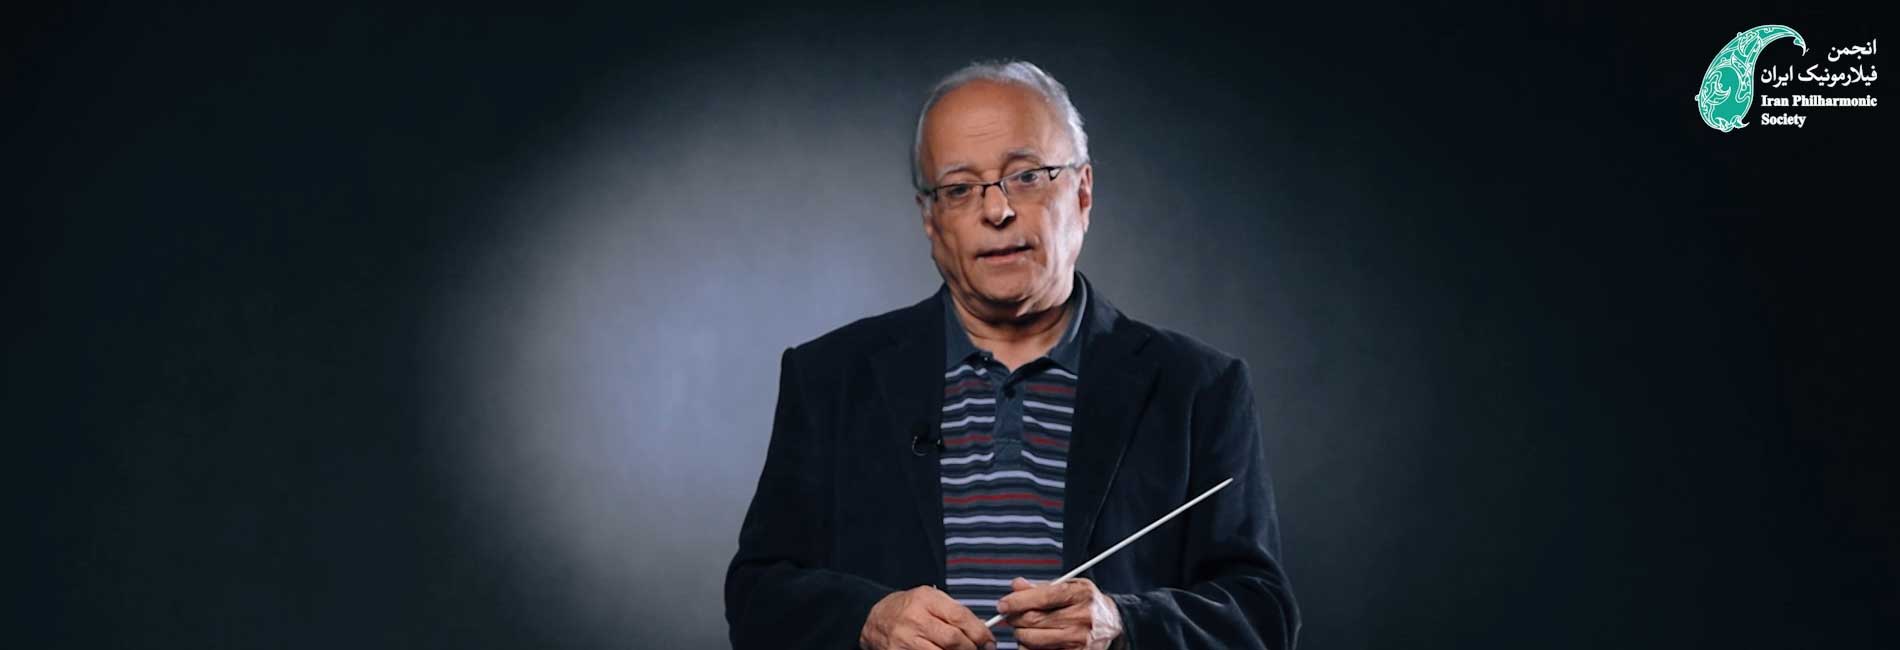 Teaching the principles of conducting an orchestra by Sharif Lotfi Episode 01-هاشور